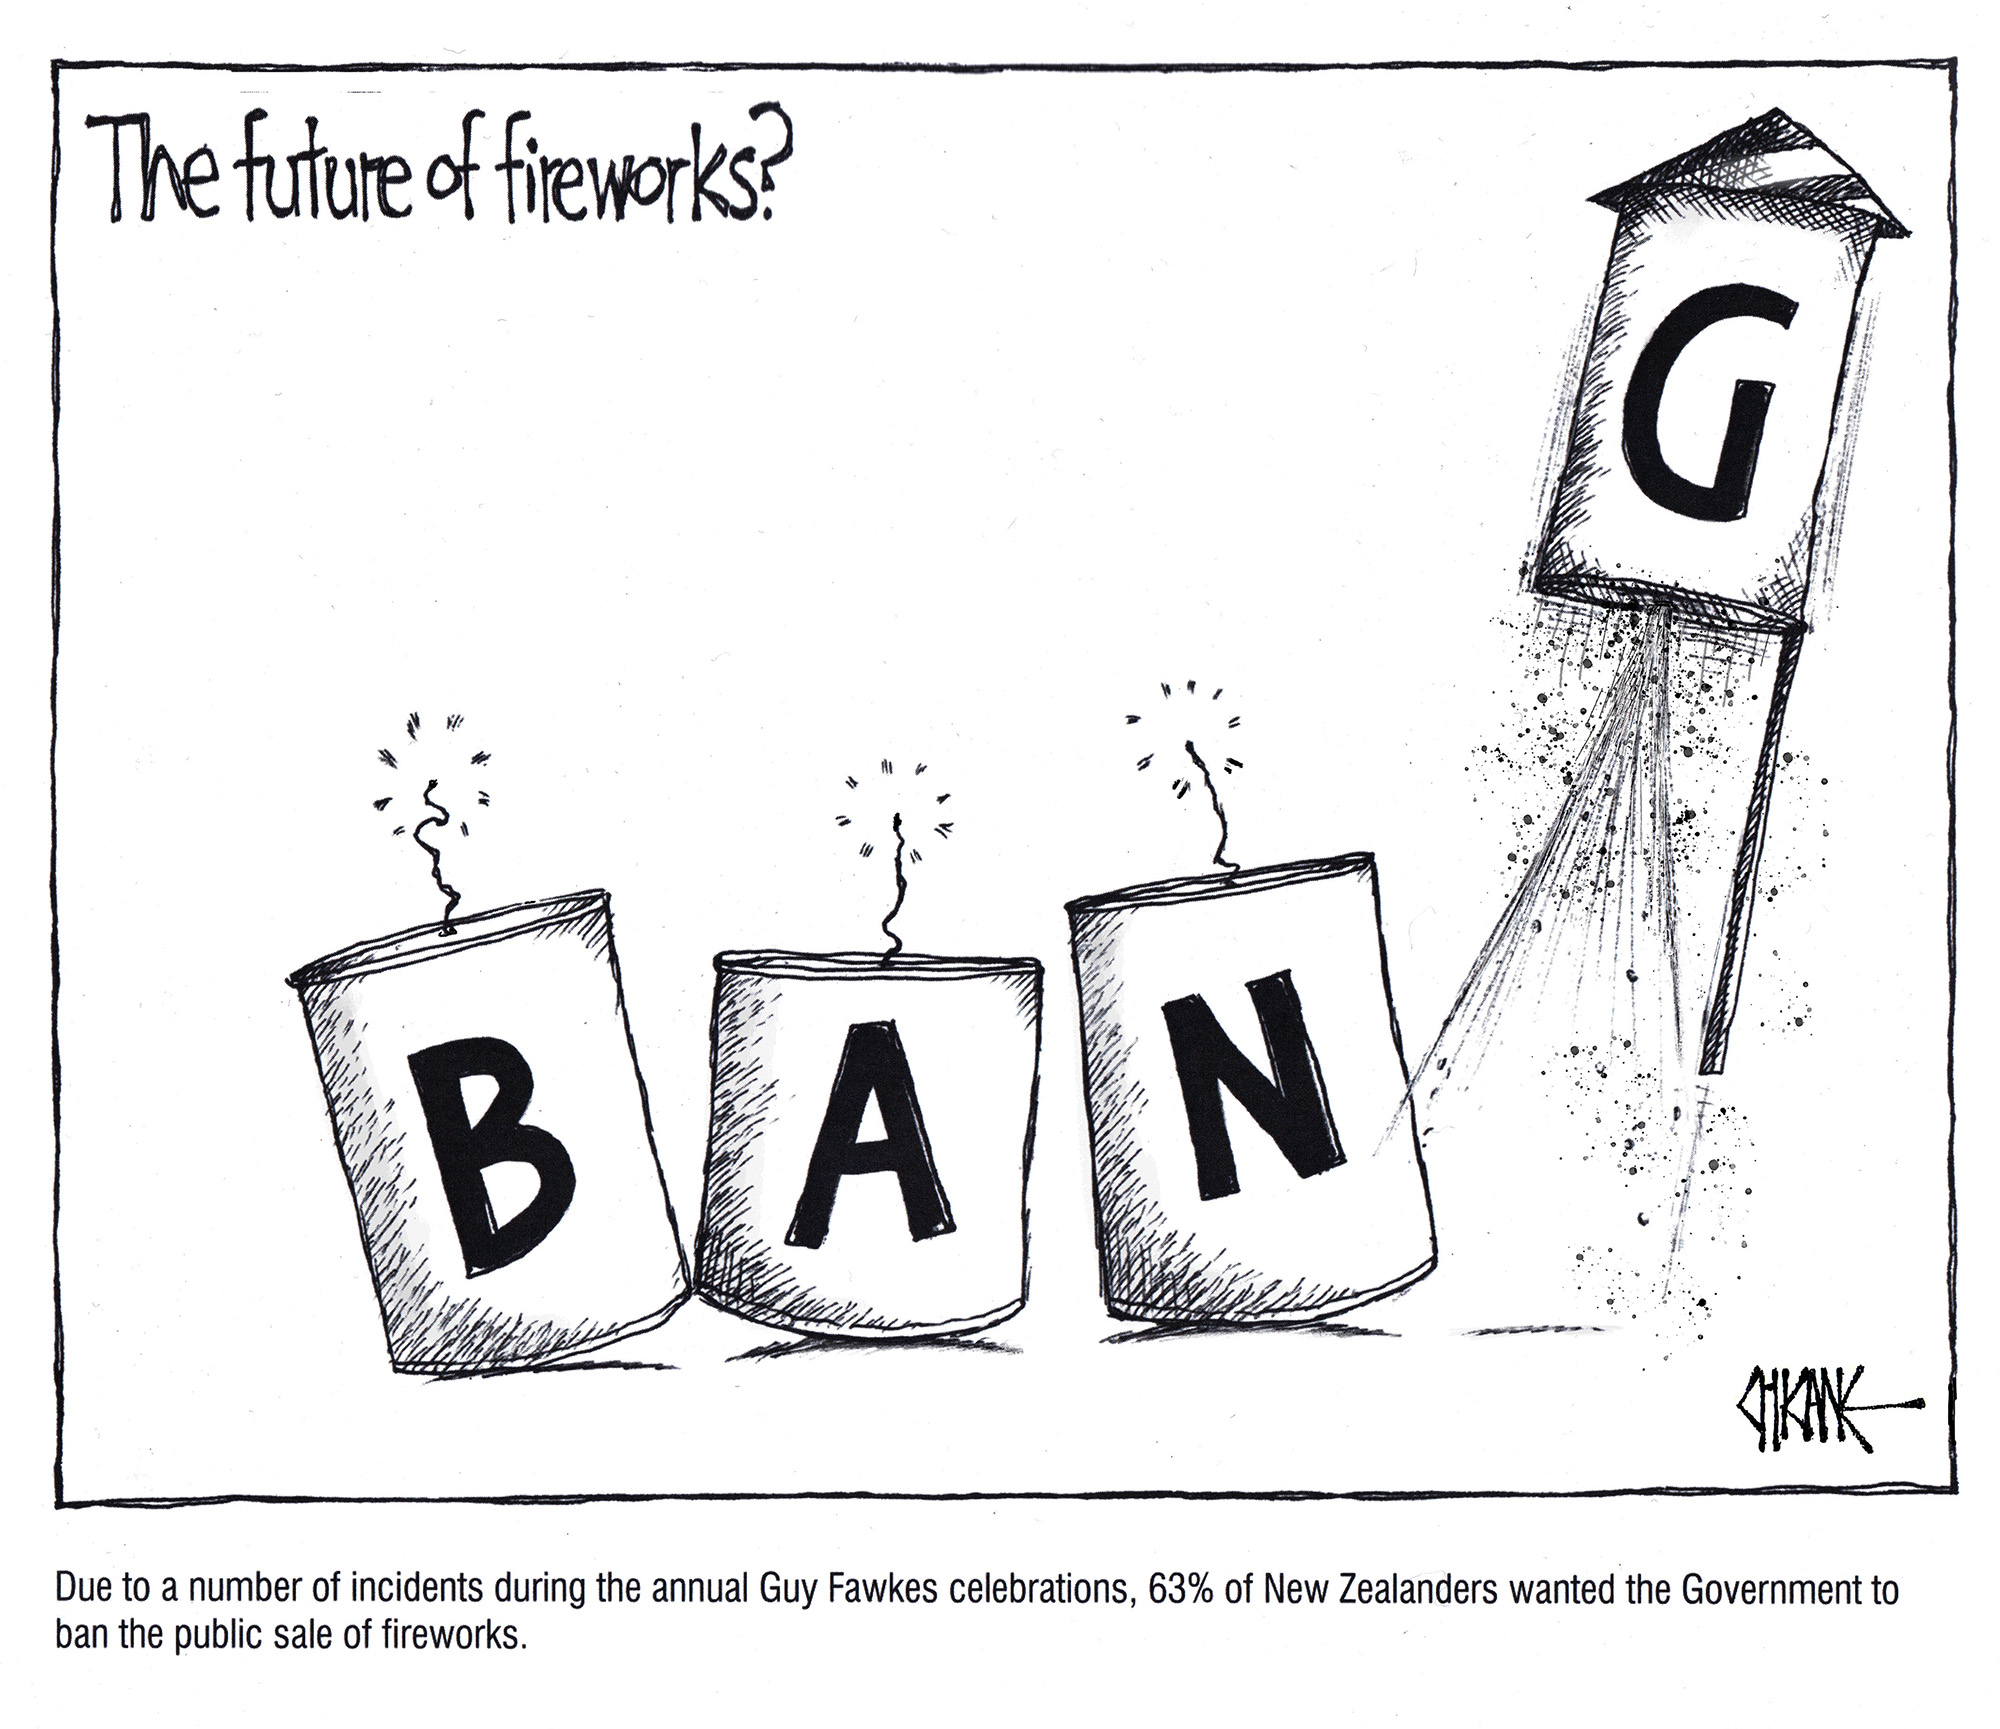 Bang. Fireworks cartoon by Chicane.